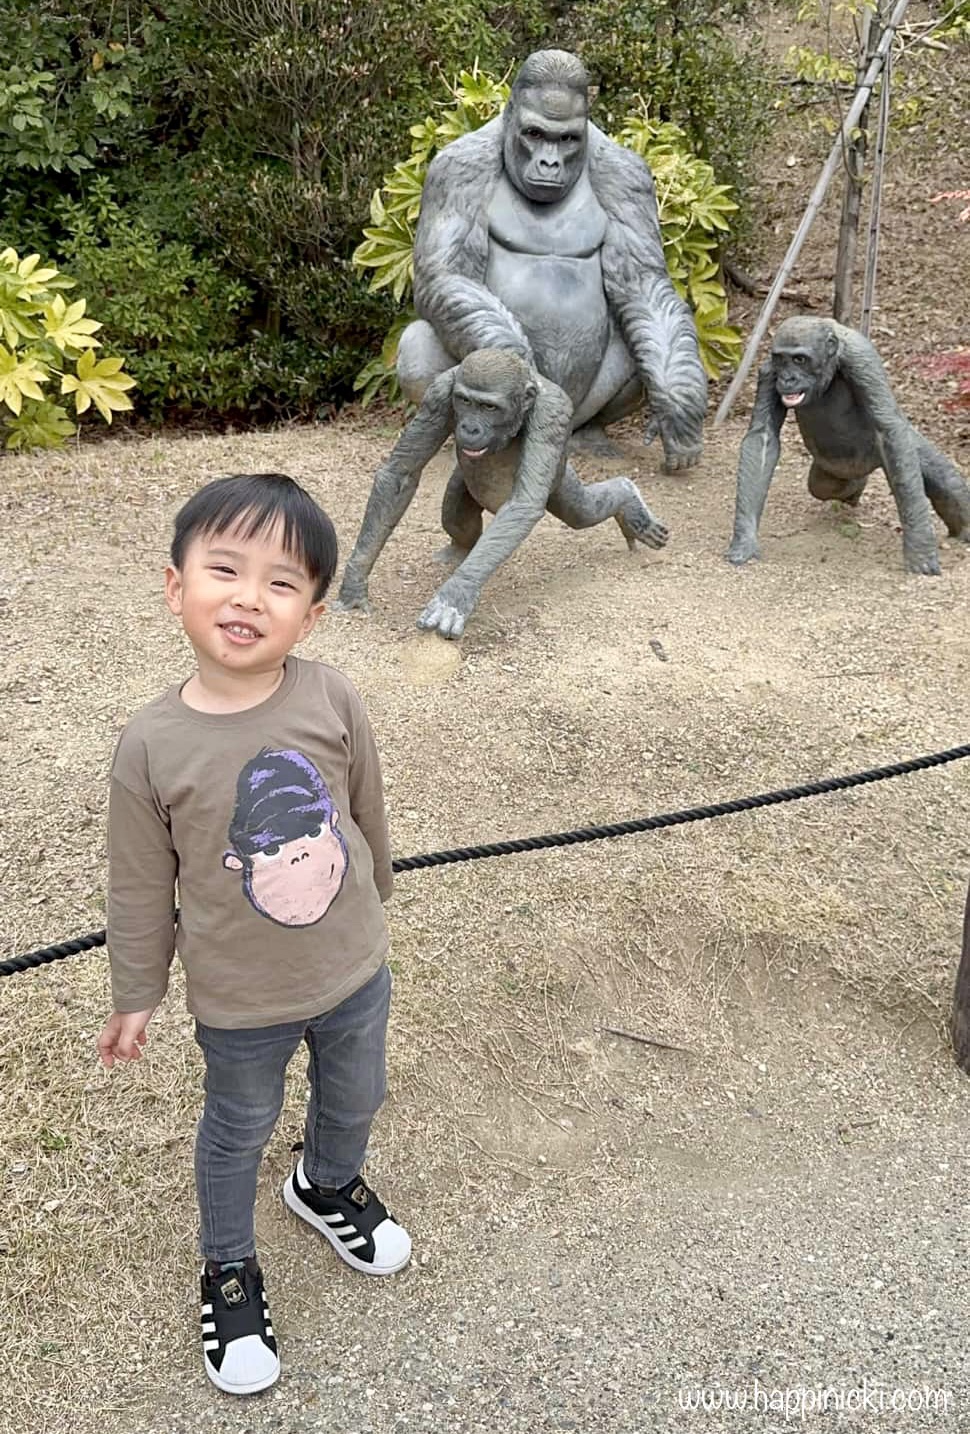 9 Things My Son Learned During His Zoo Visit